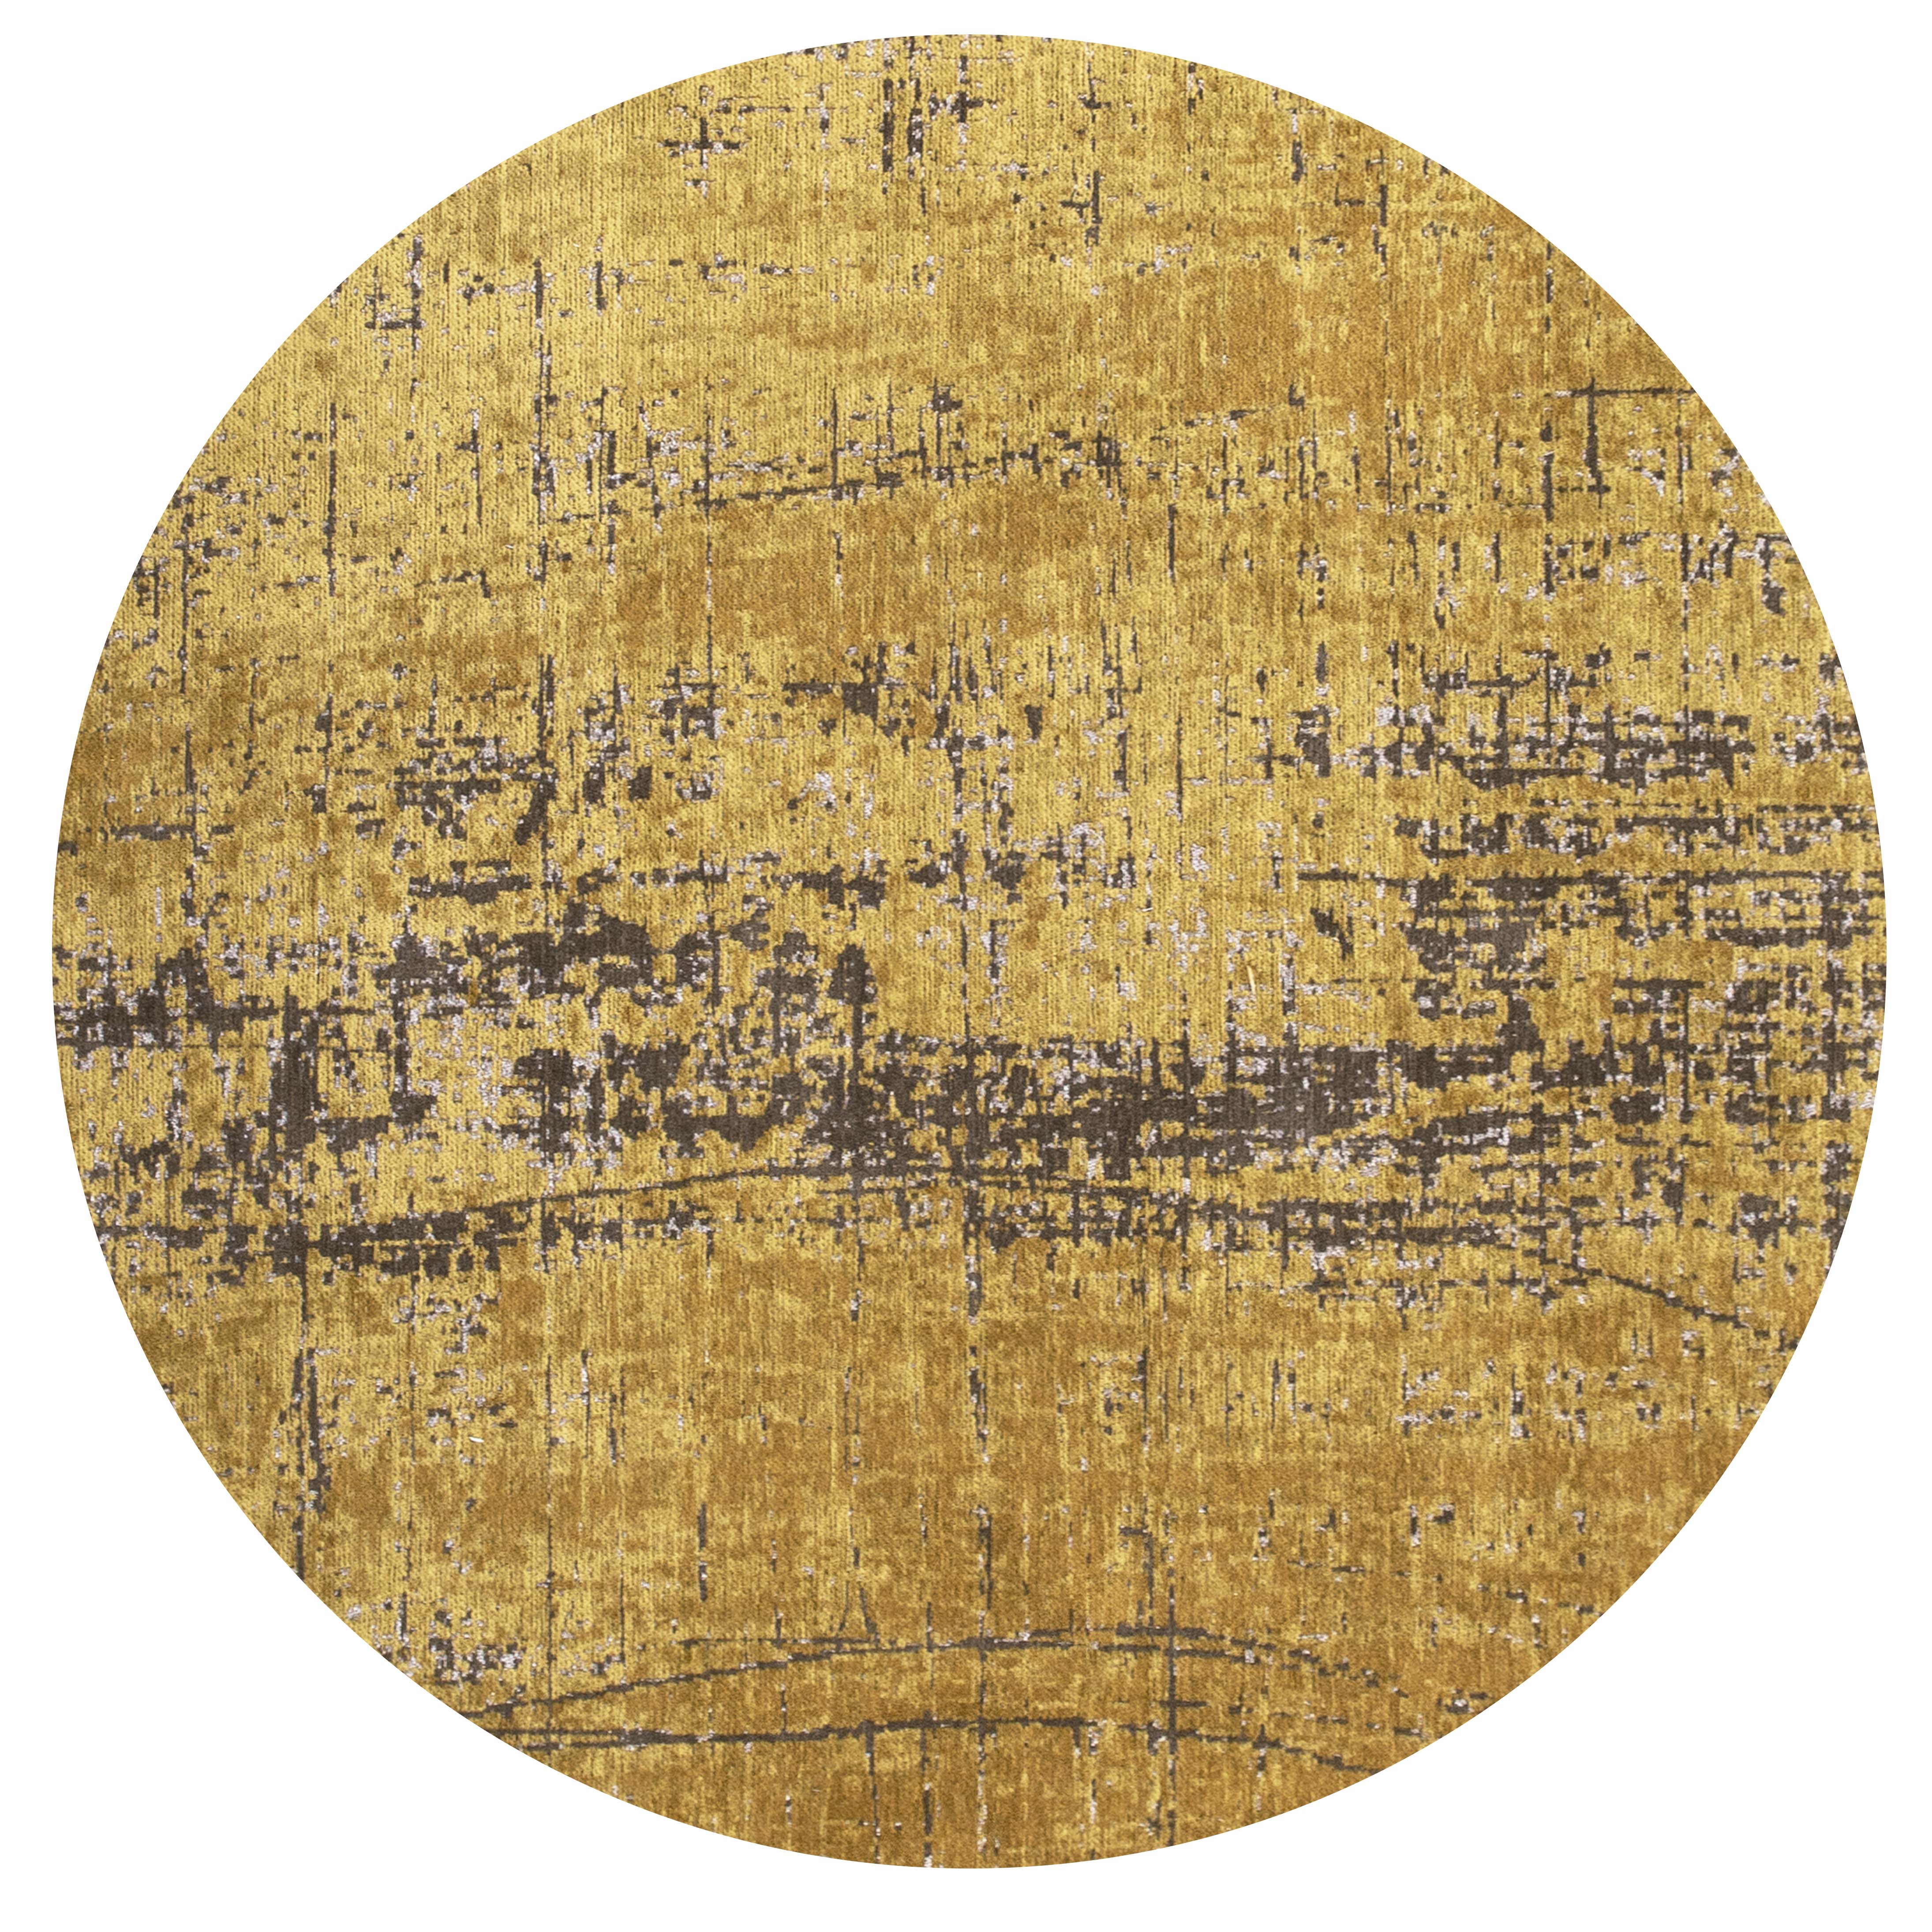 Gold circle flatweave area rug with abstract design